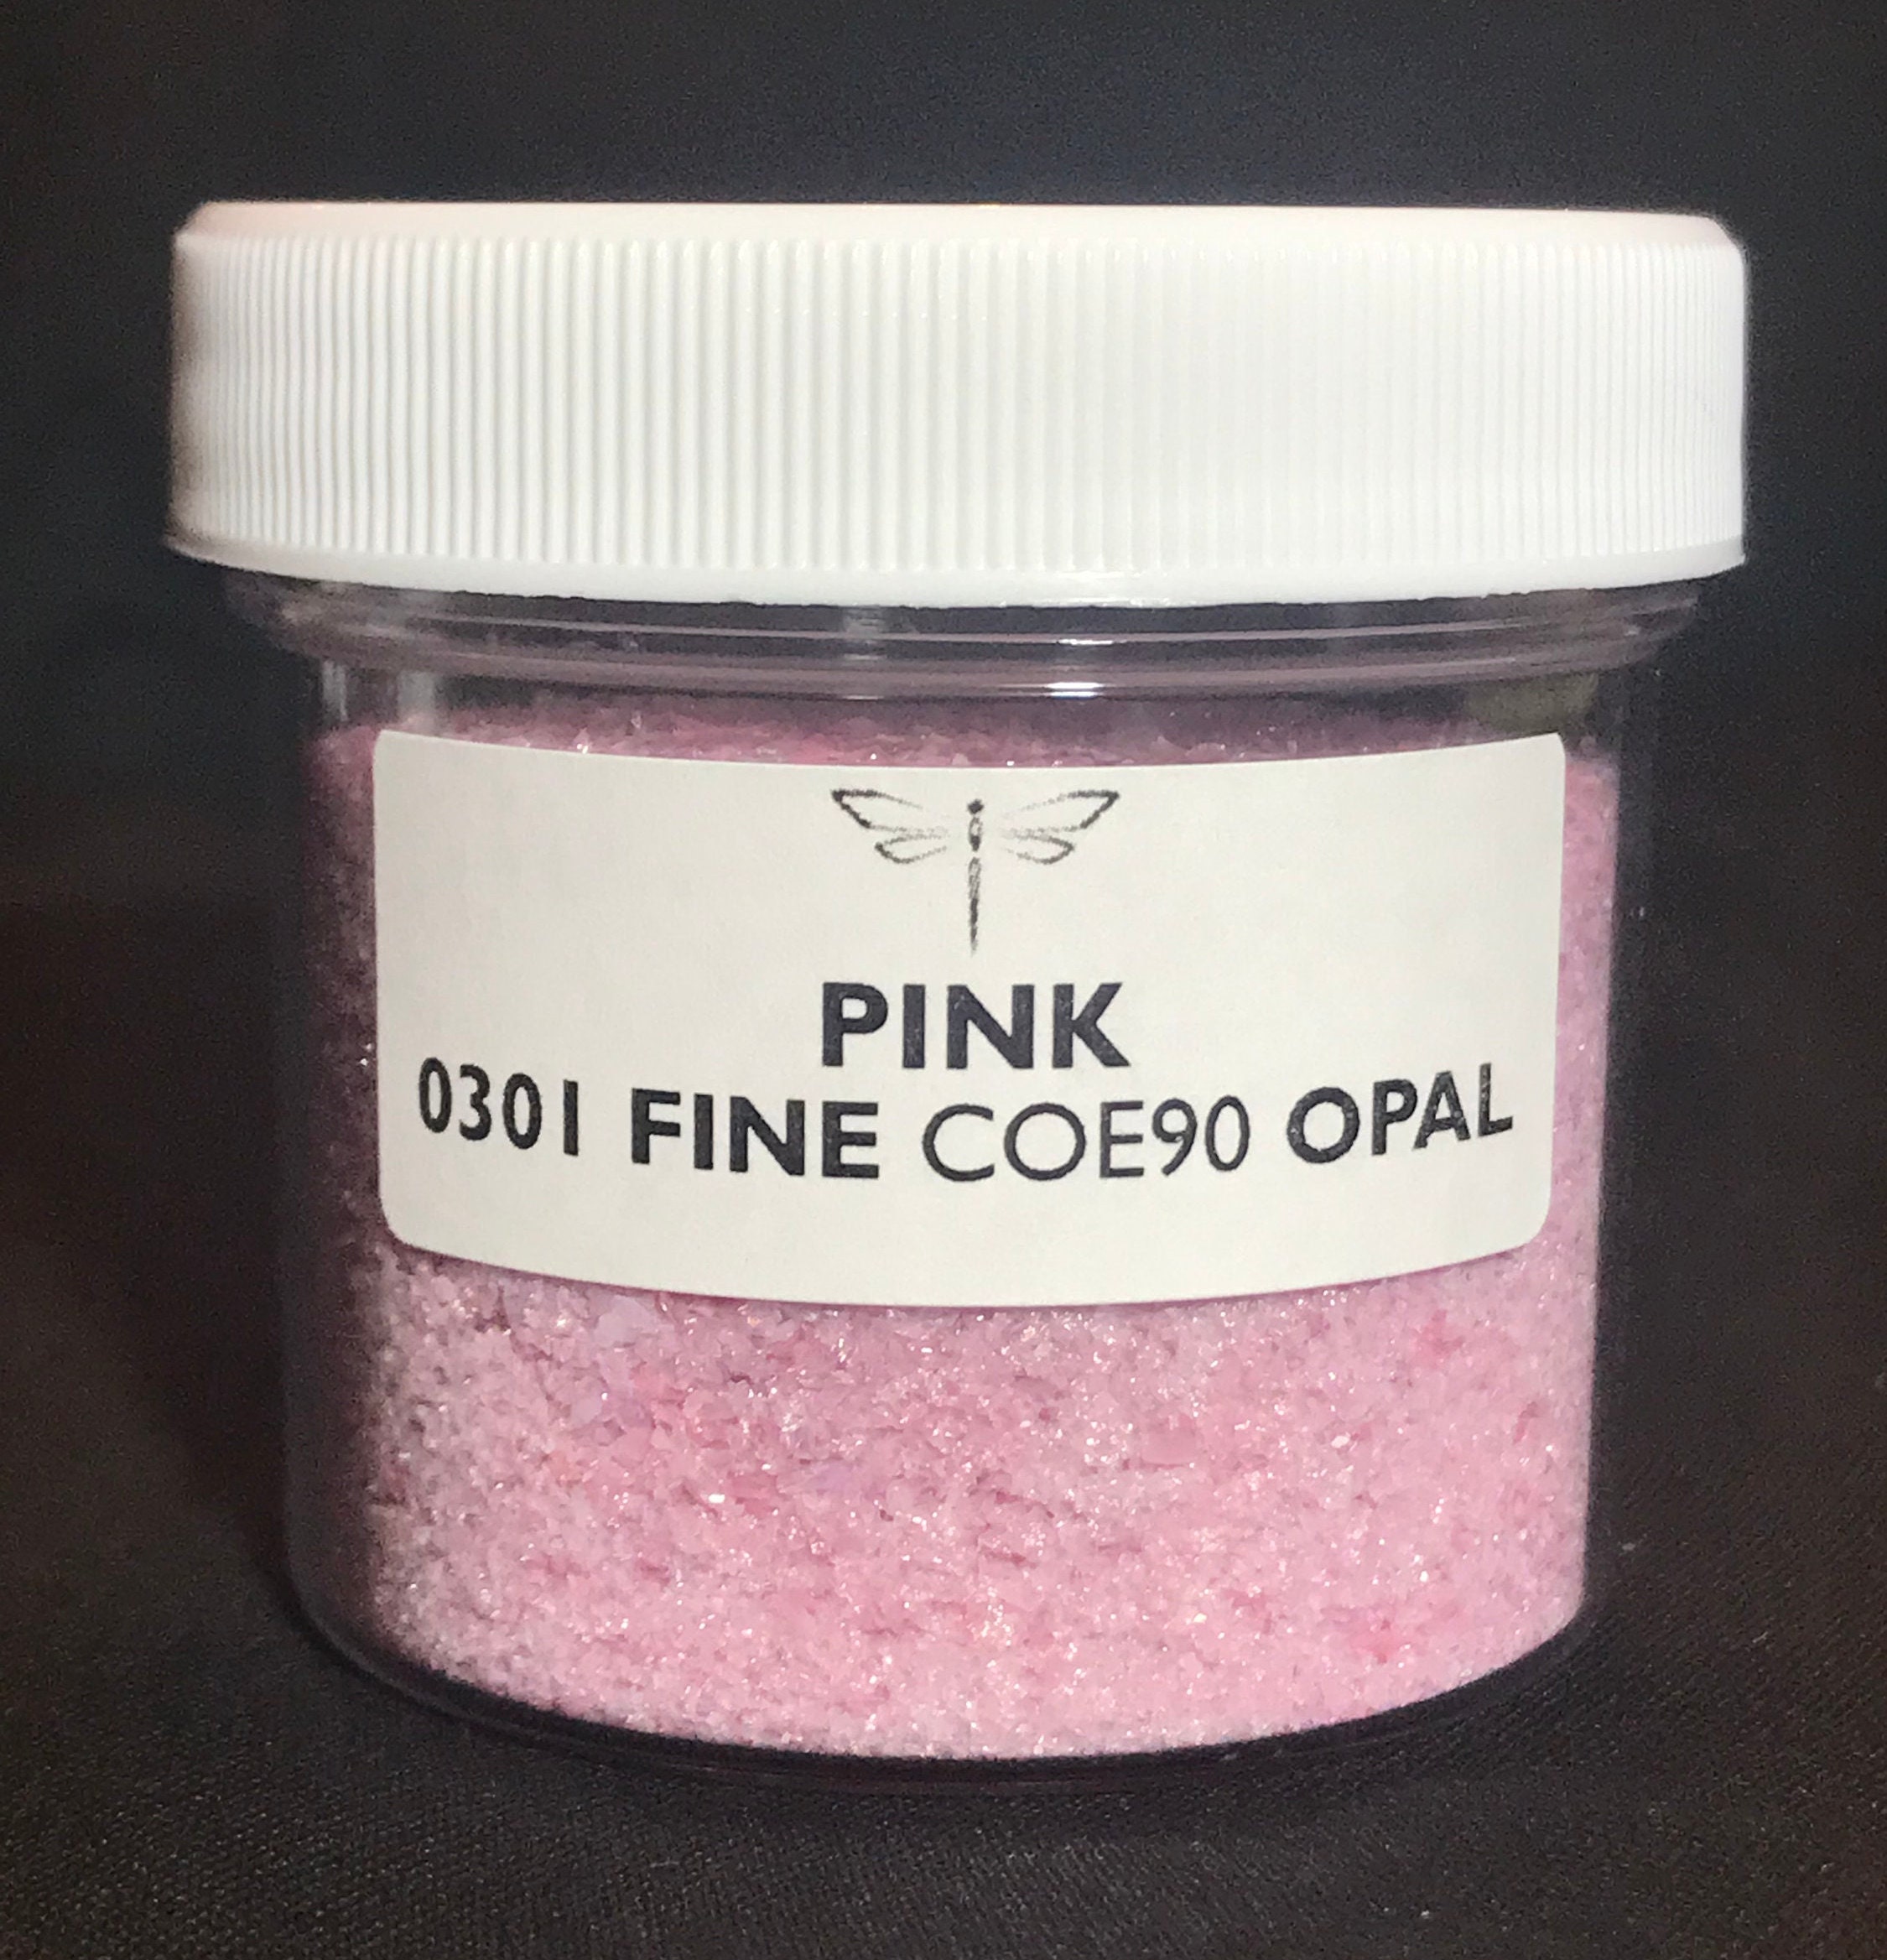 Bullseye Pink Opal Frit #0301 with Labeled Jar —-Fast Flat Rate Shipping